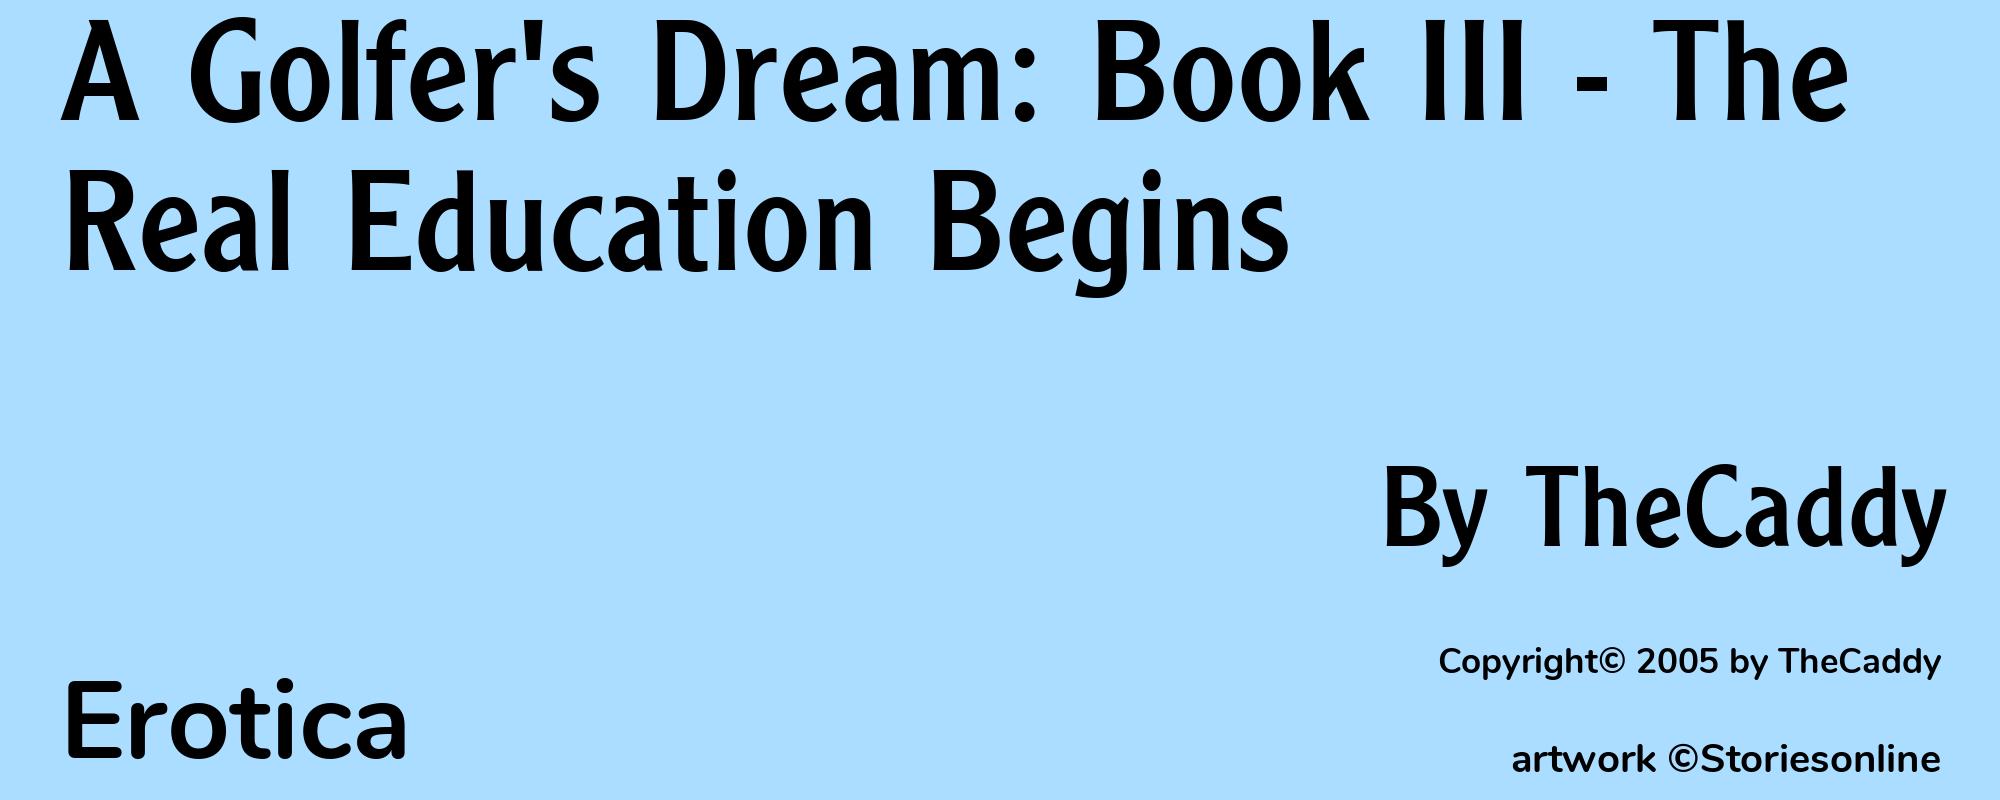 A Golfer's Dream: Book III - The Real Education Begins - Cover